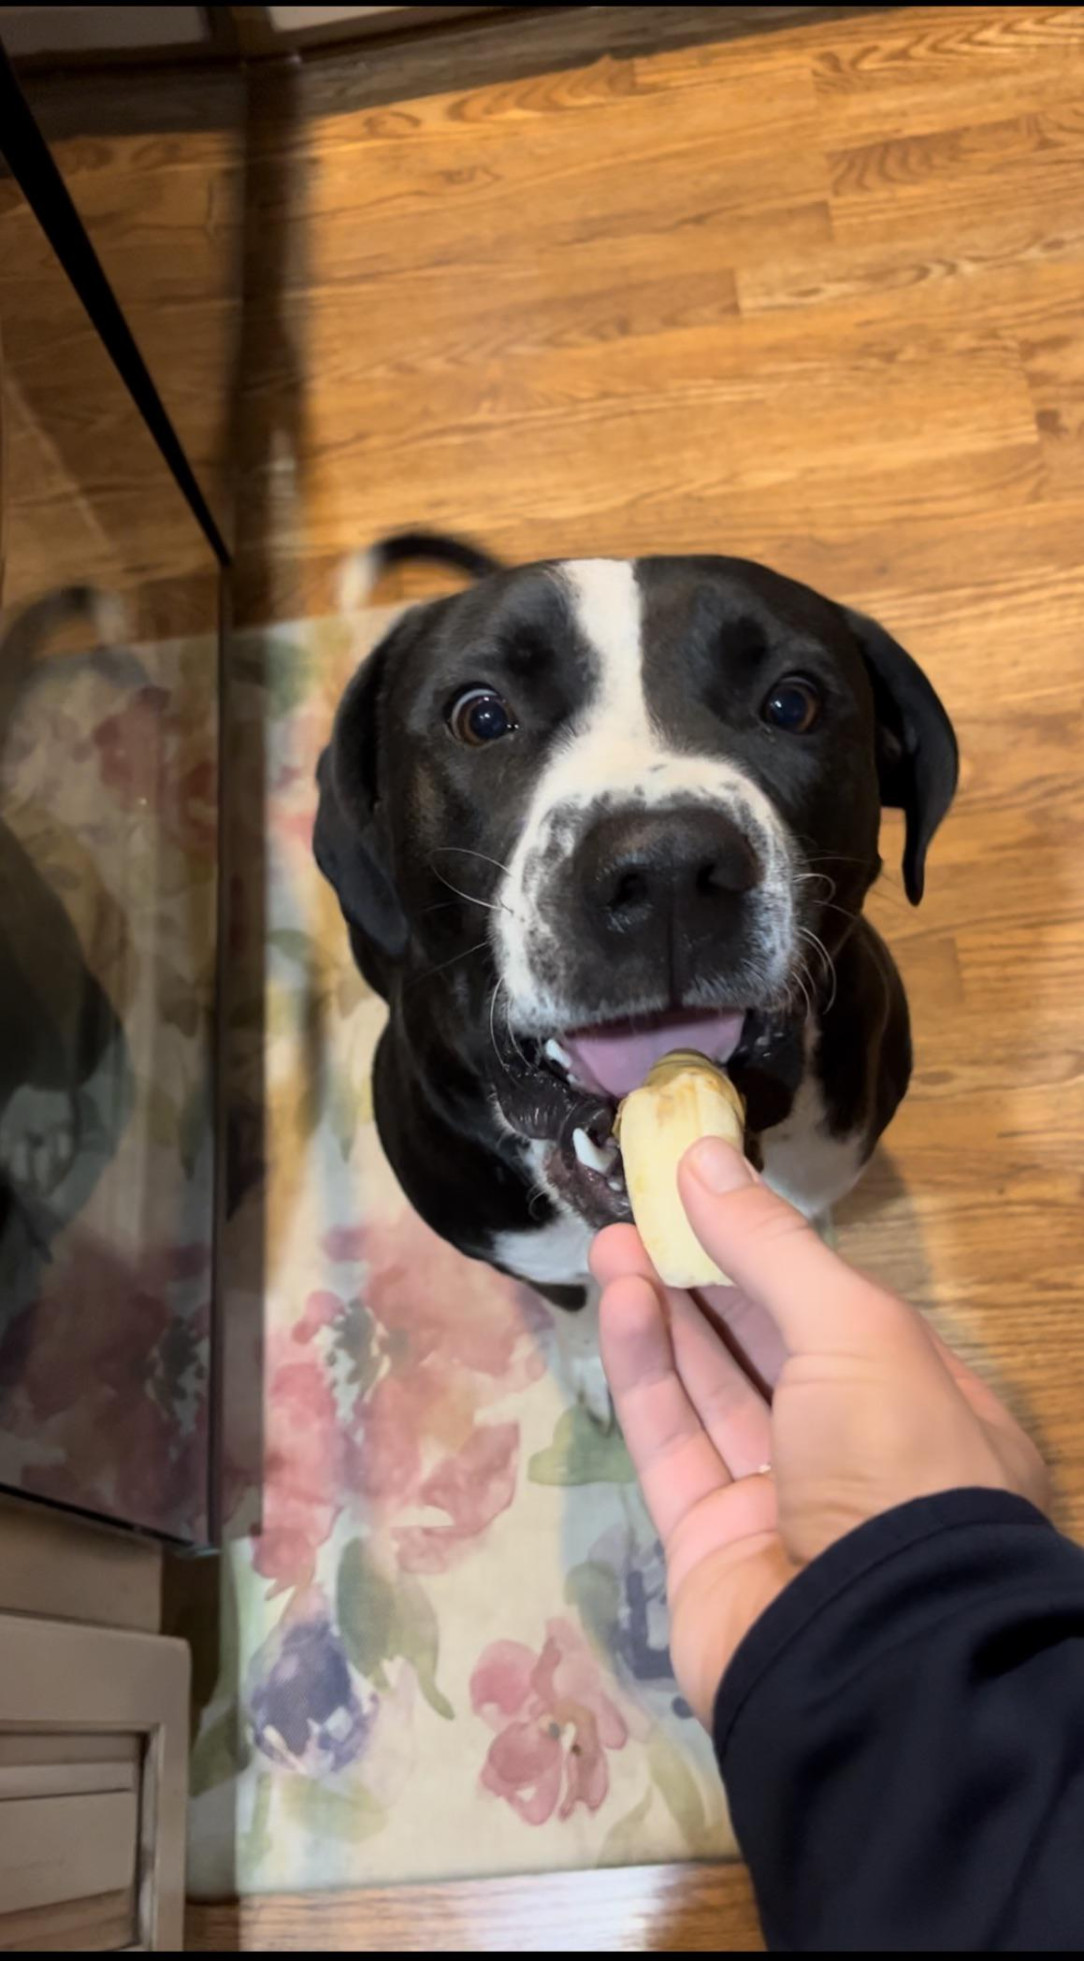 That look of derpy joy just before the delicious banana peanut butter snack